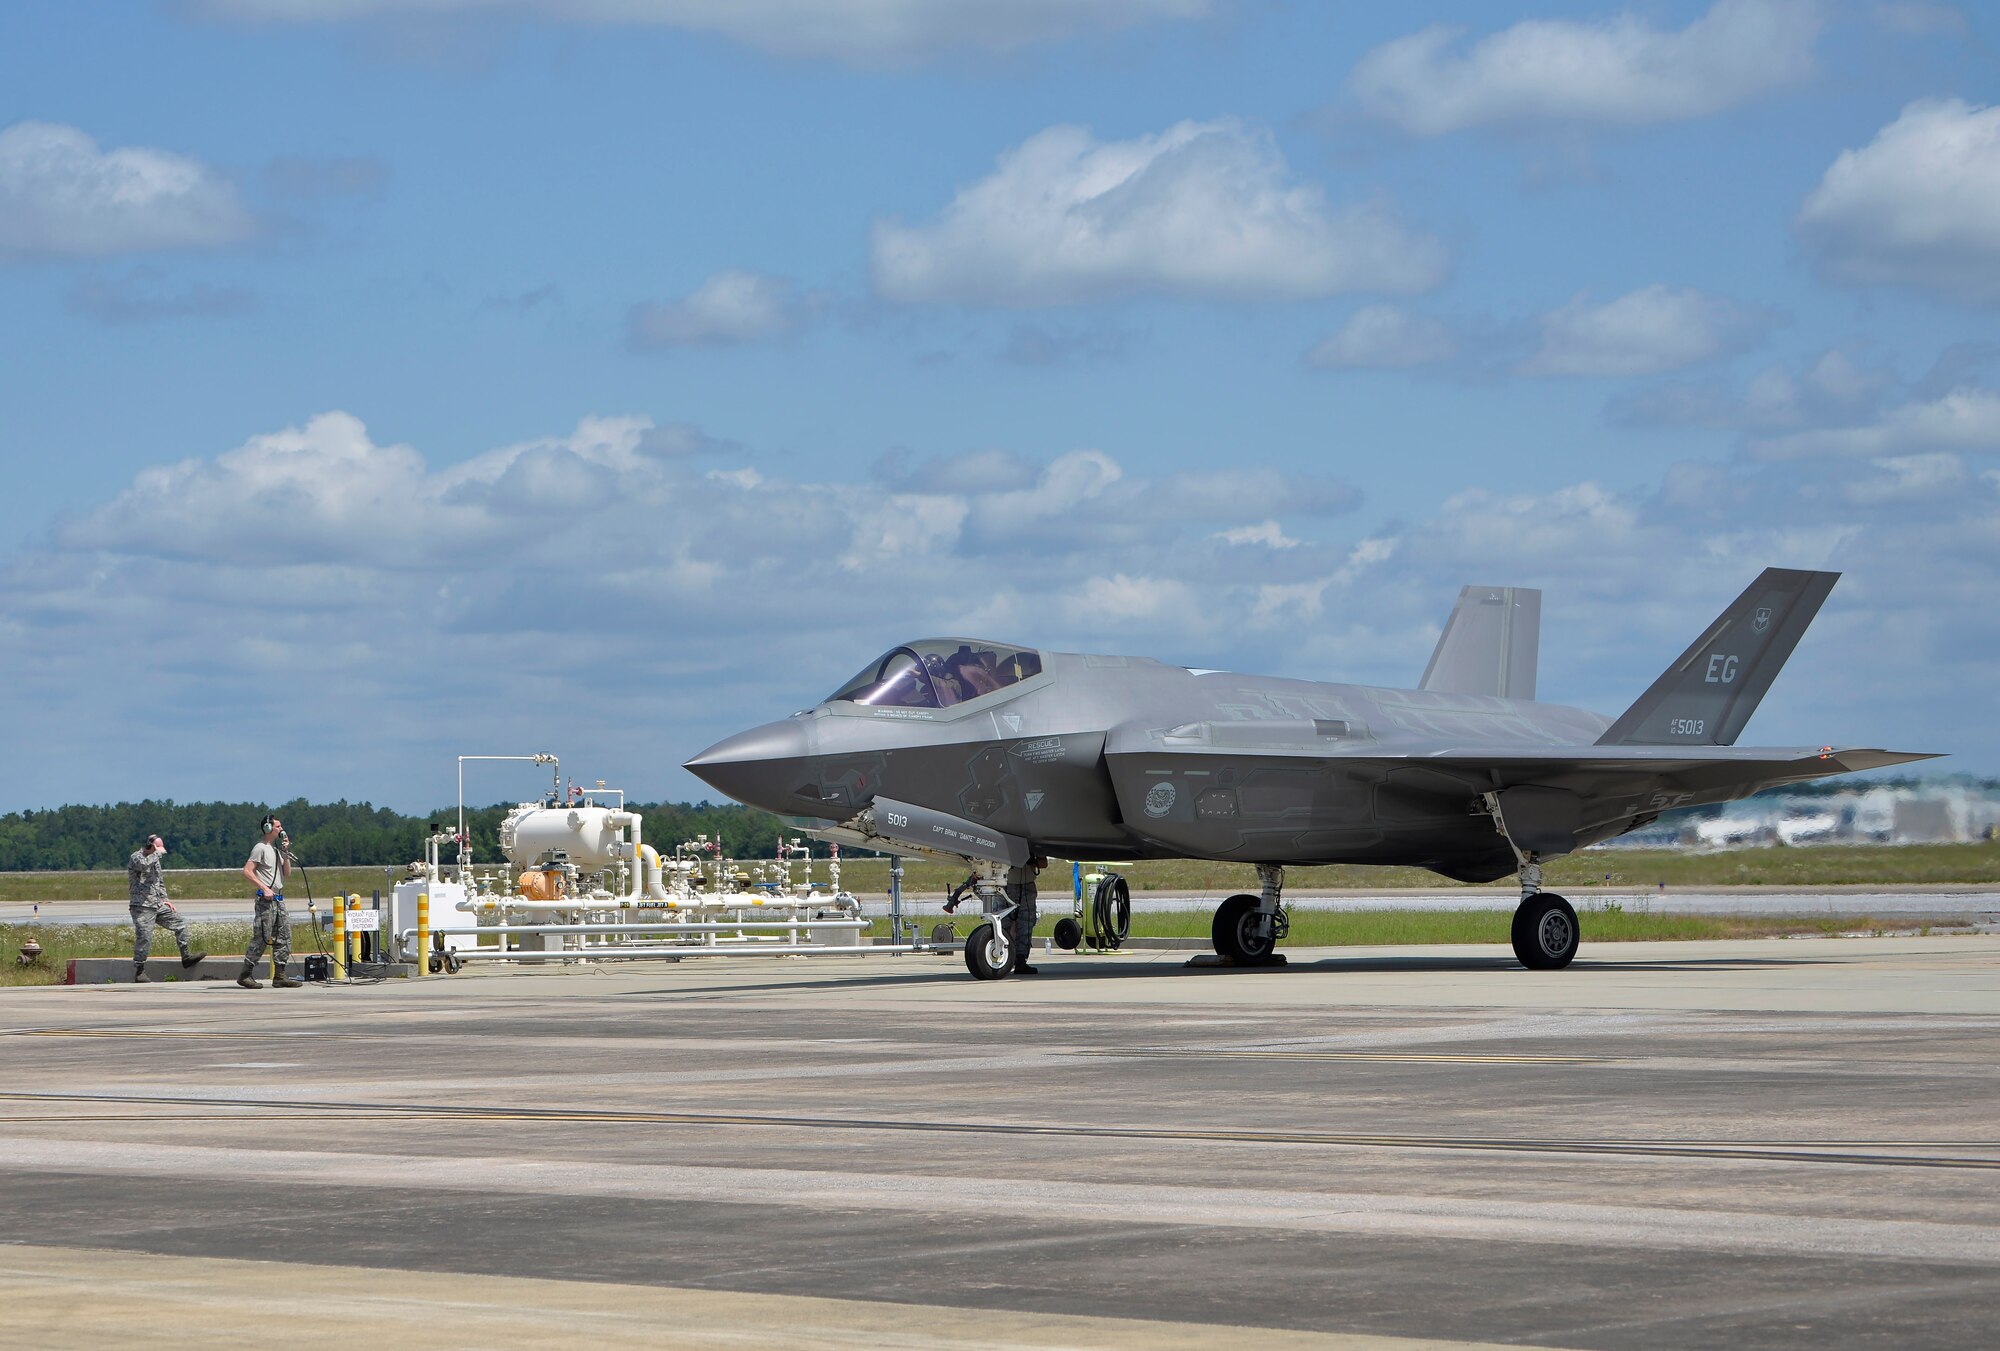 An F-35A Lightning II taxis up to a fuel tank for hot pit refueling at Eglin Air Force Base, Fla., May 13, 2016. This type of aircraft refueling is done while the engine is running to get jets back in the air more quickly and is a common practice during wartime. The alternative is to taxi the aircraft back to the sunshade, shut down, refuel, and re-start the aircraft. Hot pit refueling allows the 58th Fighter Squadron to maximize time flying the fifth-generation jet. (U.S. Air Force photo/Senior Airman Andrea Posey)